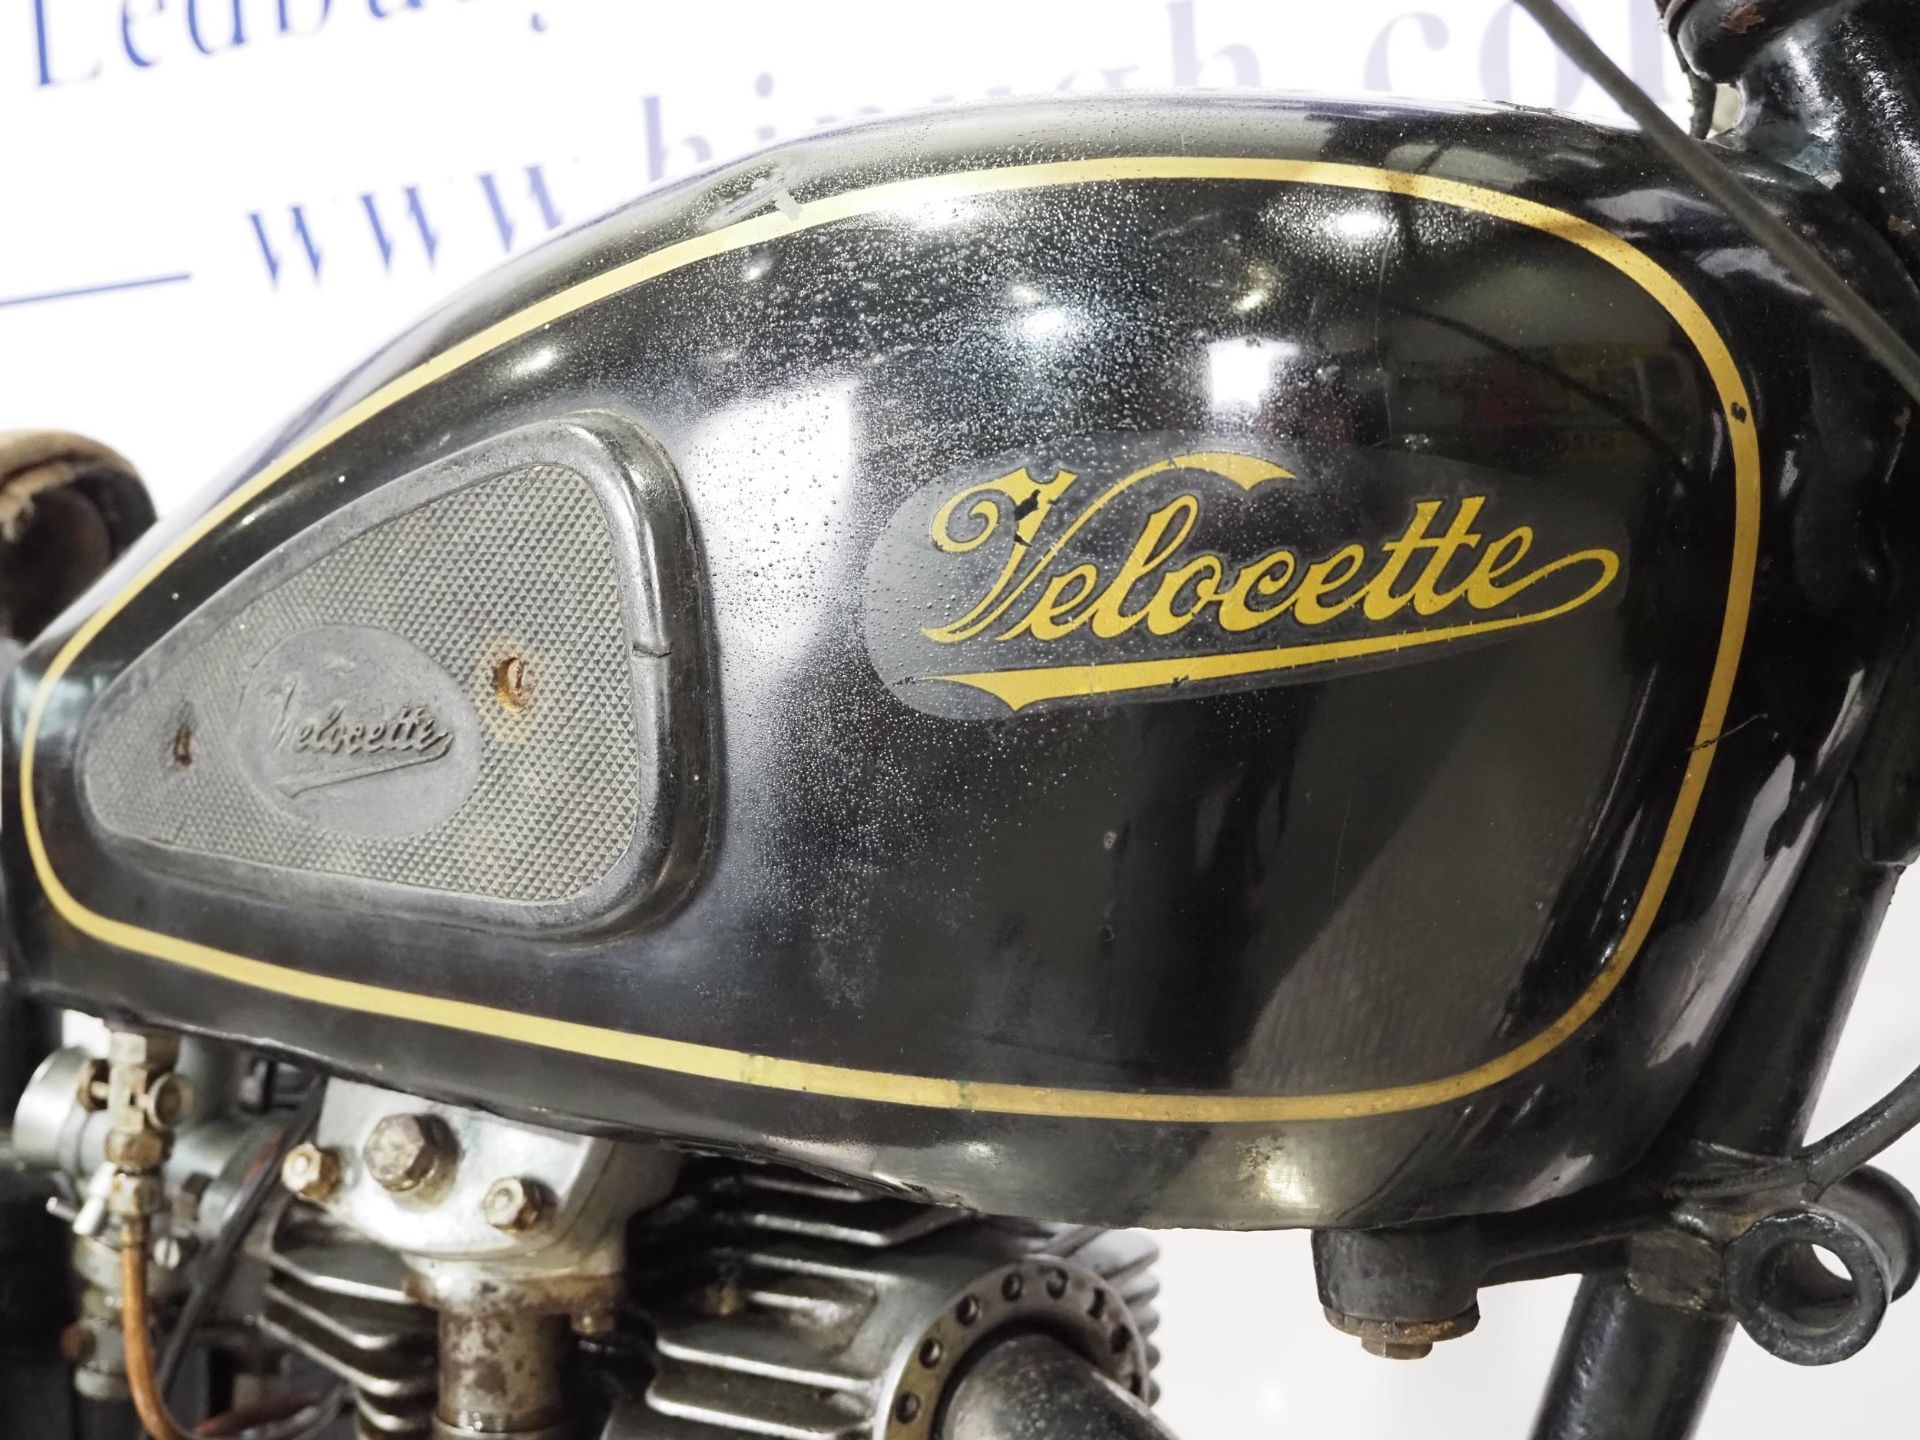 Velocette KSS motorcycle. 1947. 350cc. Frame No. 7331 Engine No. KSS 10703 Runs and rides but will - Image 7 of 10